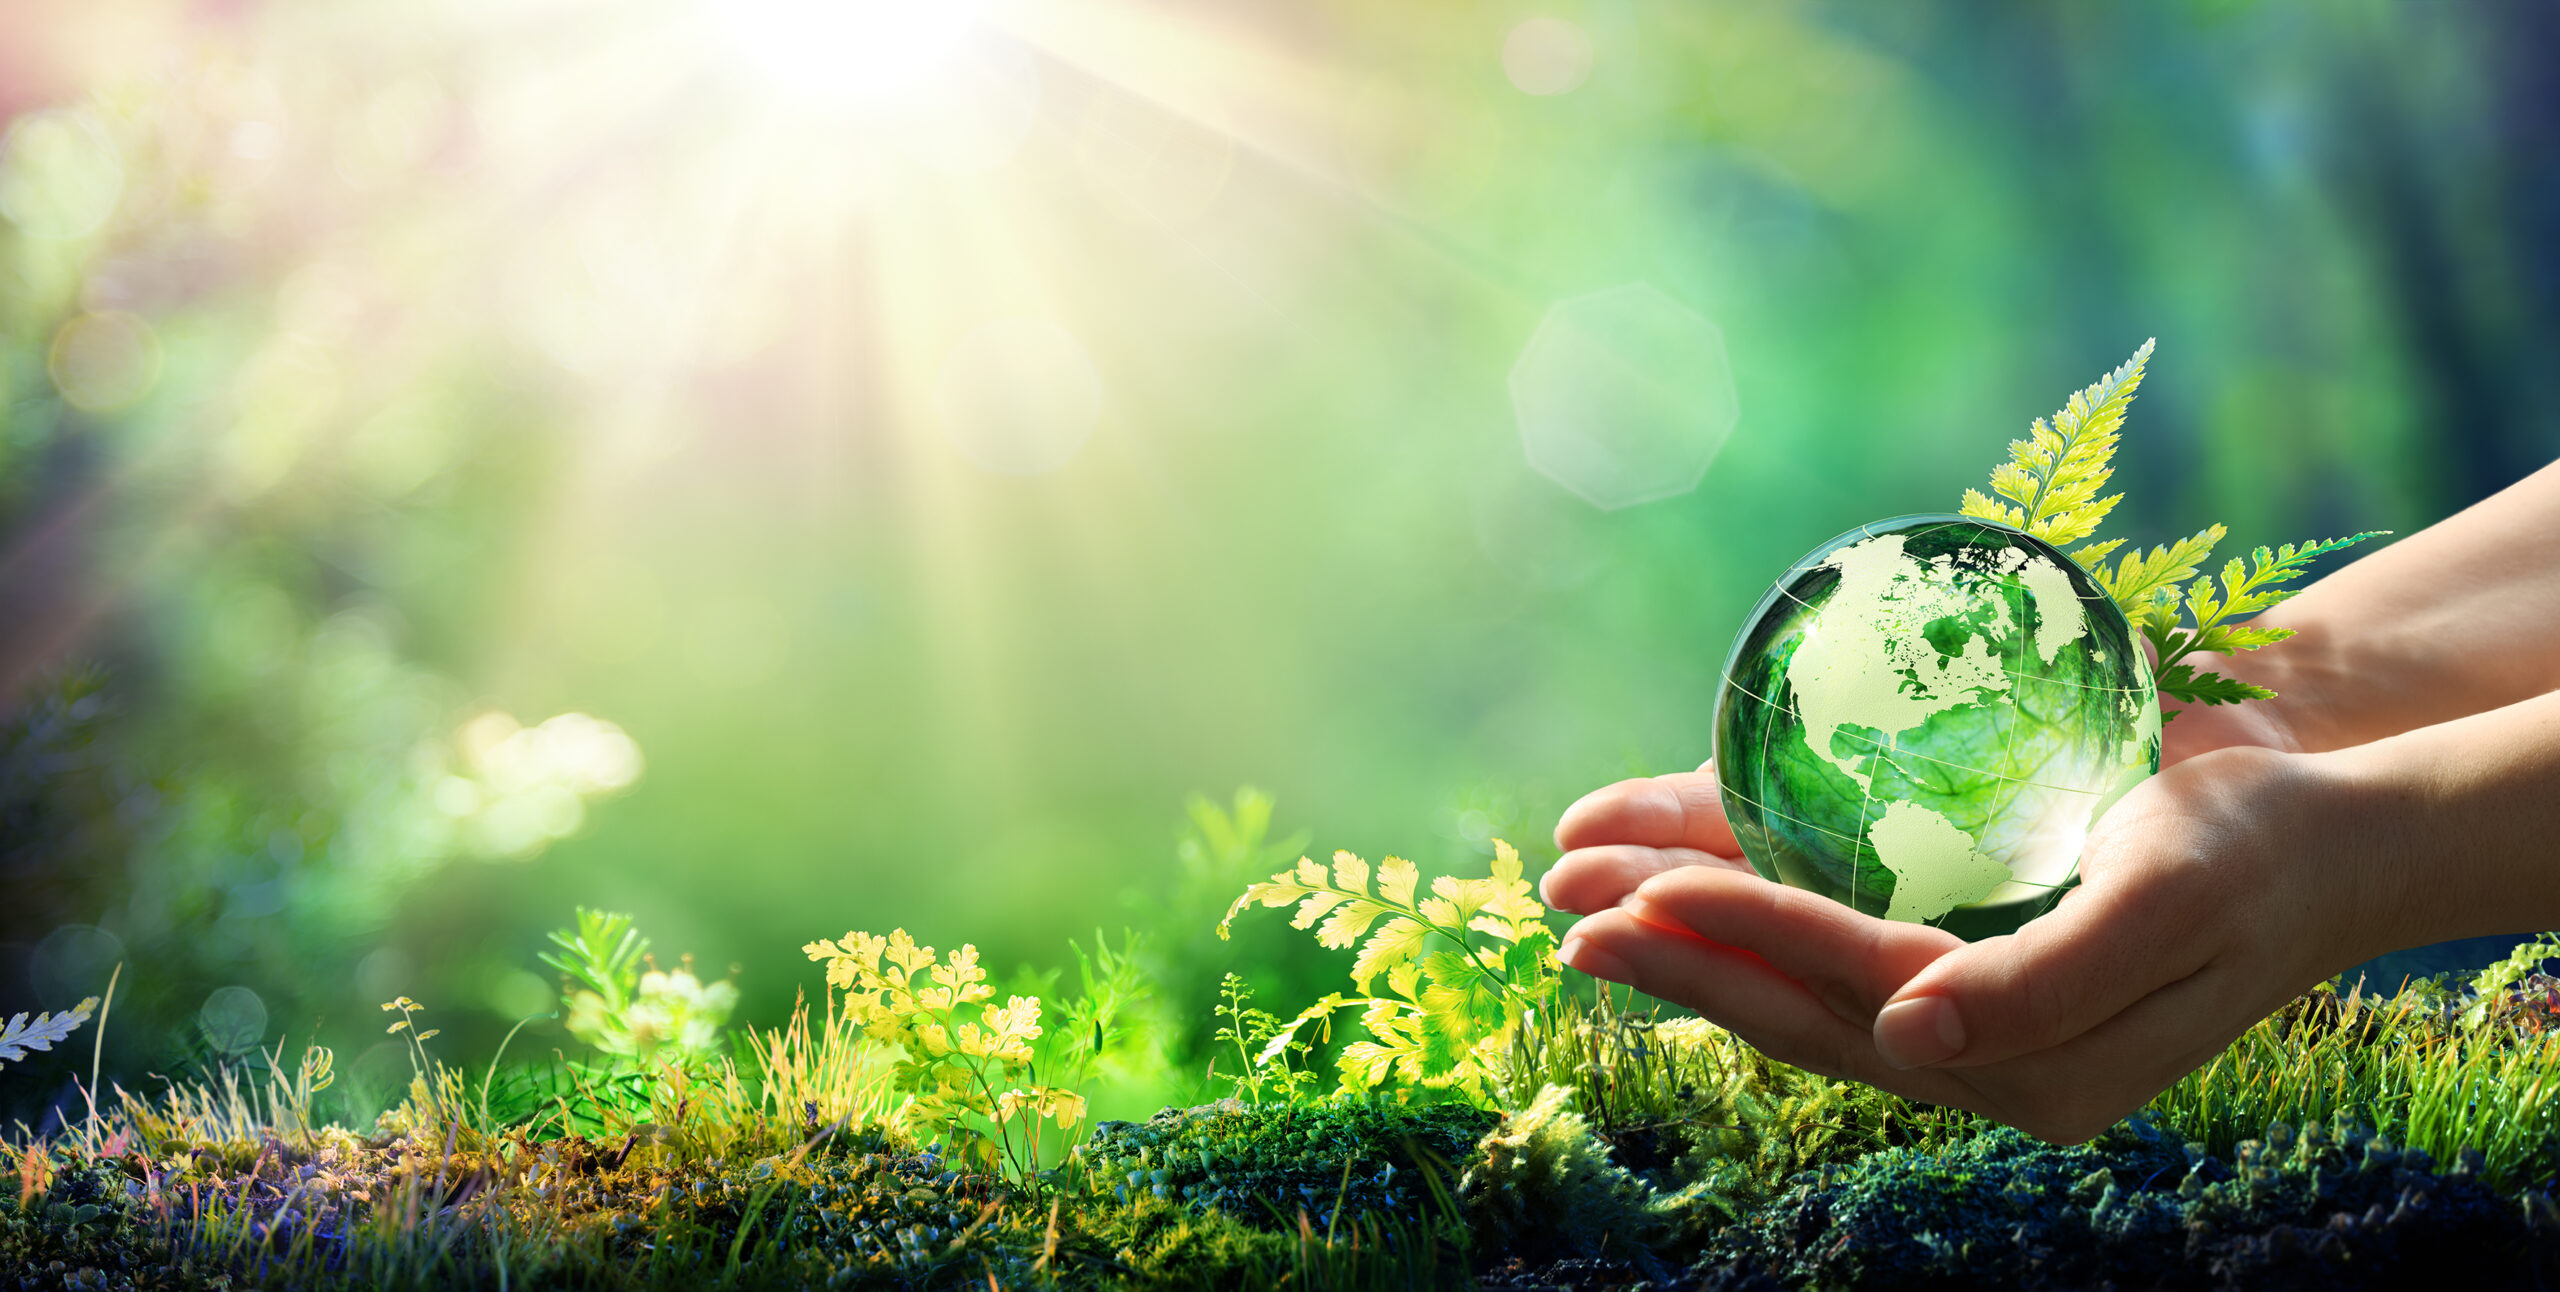 Hands Holding Globe Glass In Green Forest – Environment Concept